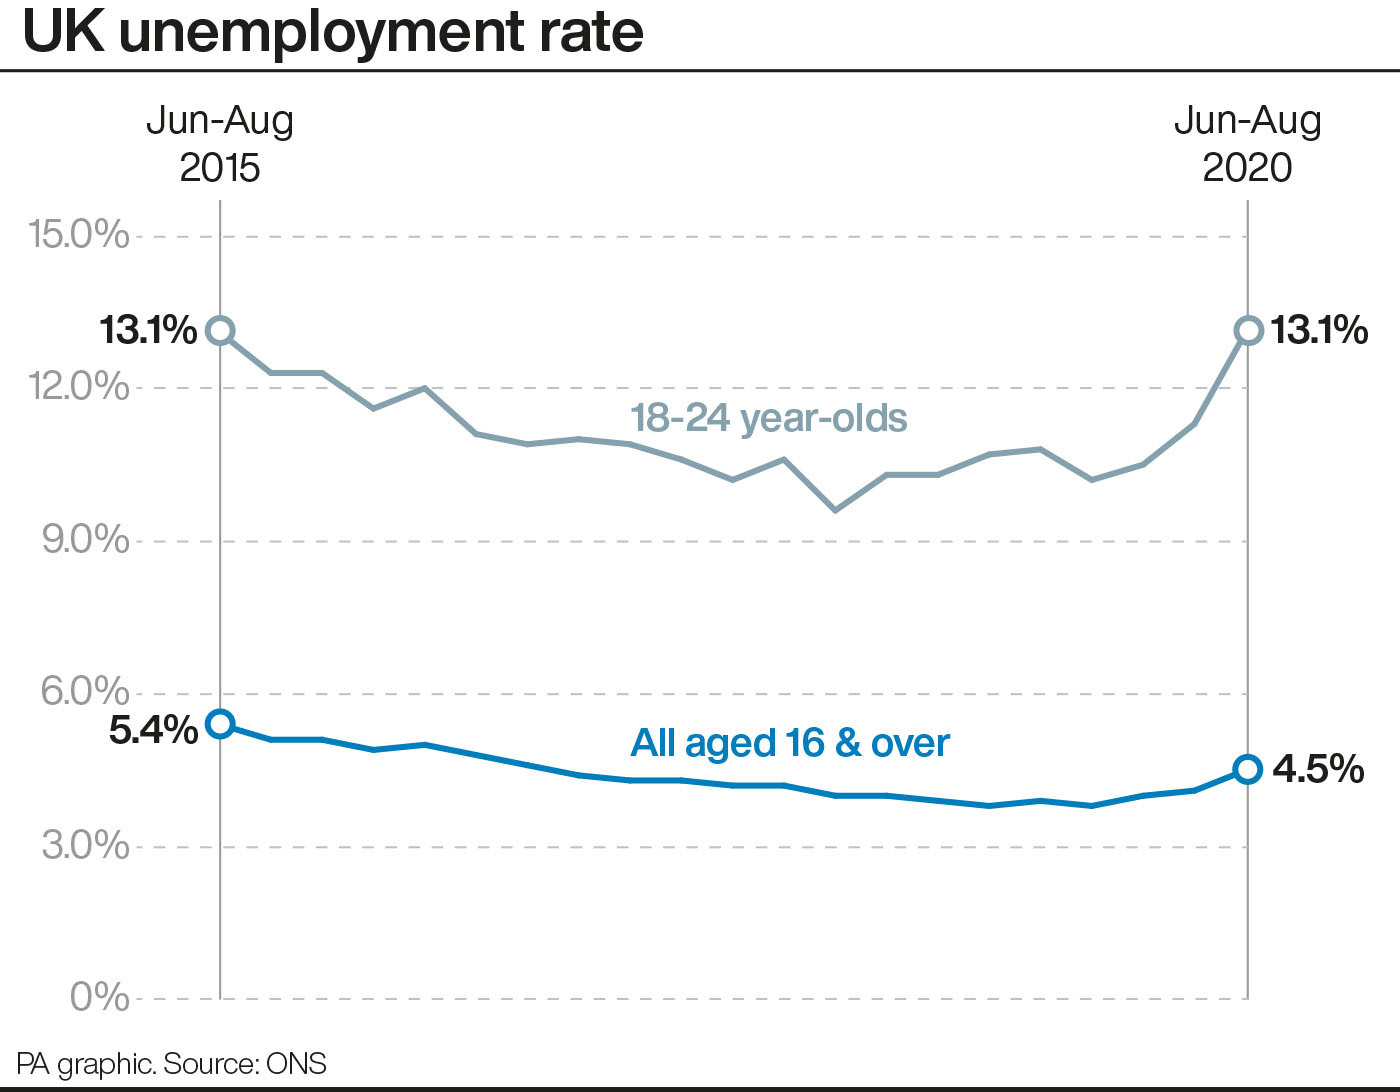 a period of low economic activity and rising unemployment